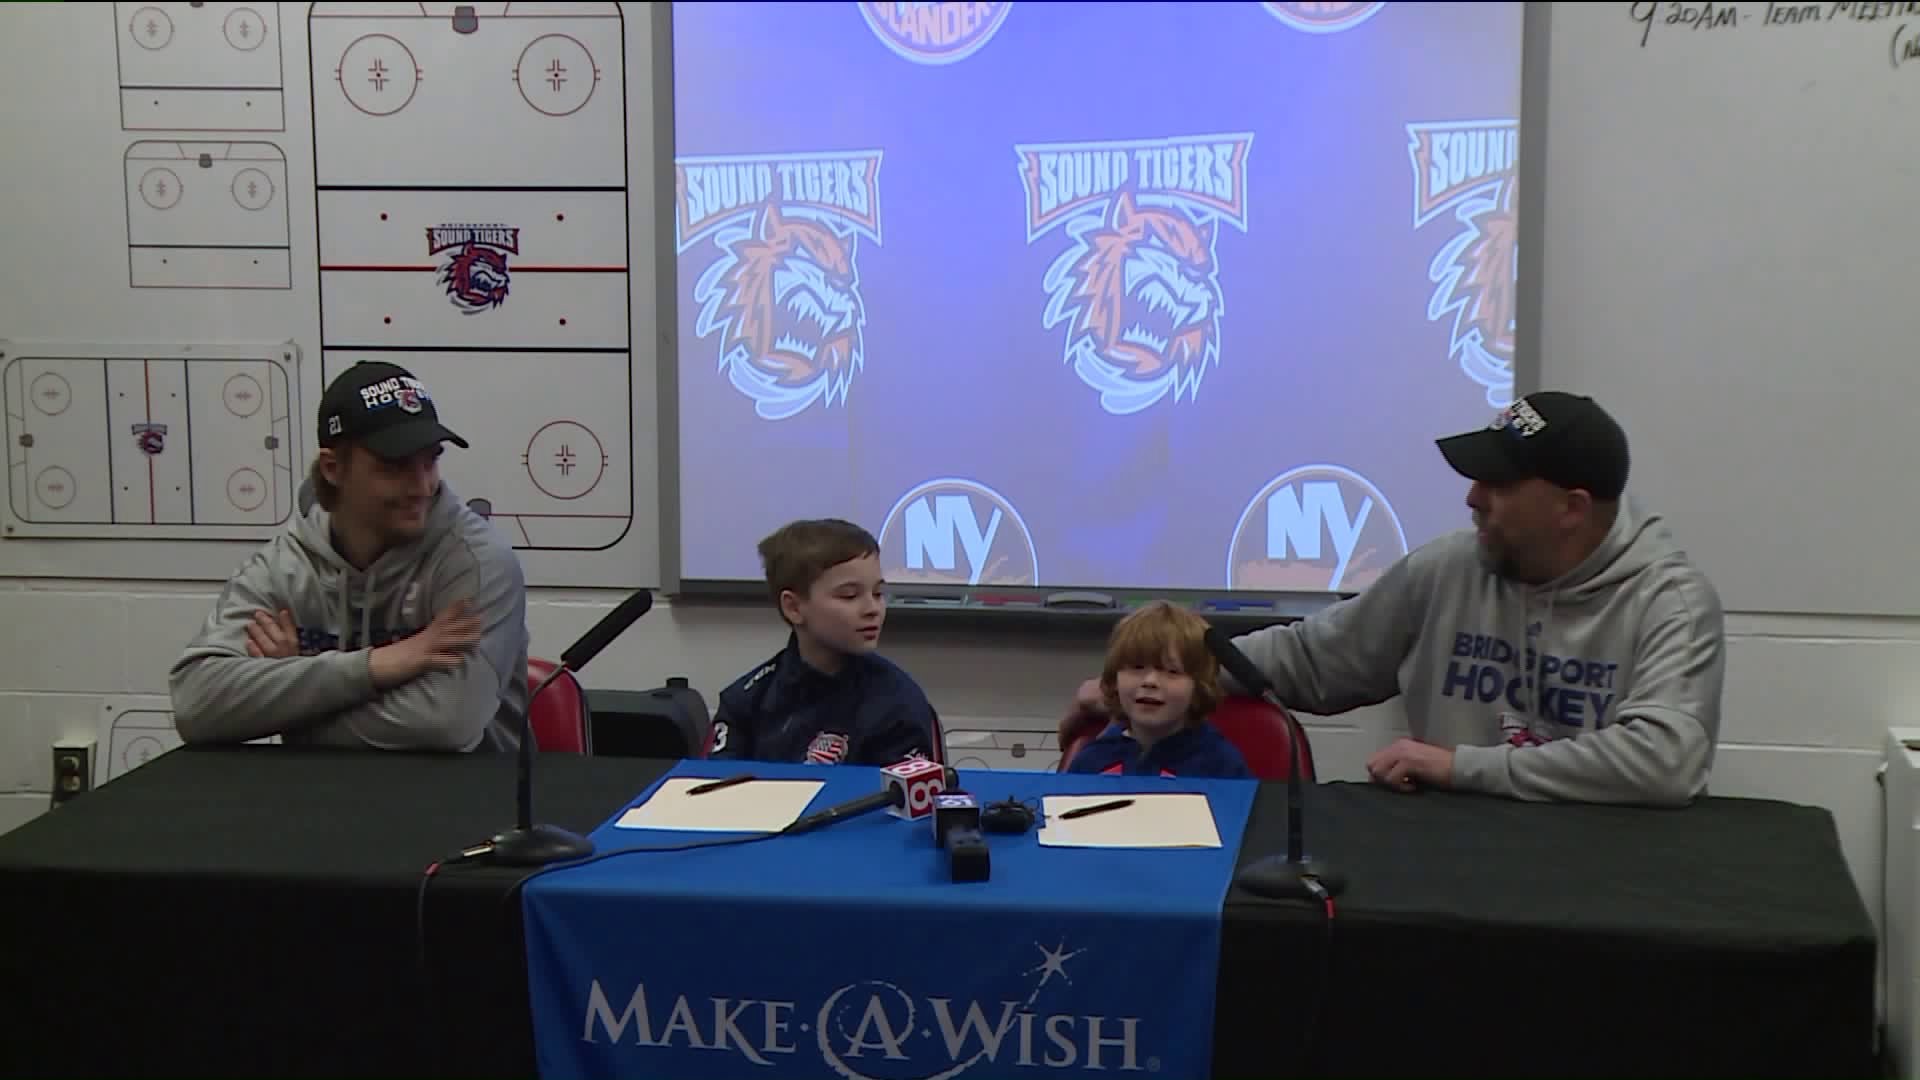 Bridgeport Sound Tigers, Make-A-Wish Foundation welcome two new members to team